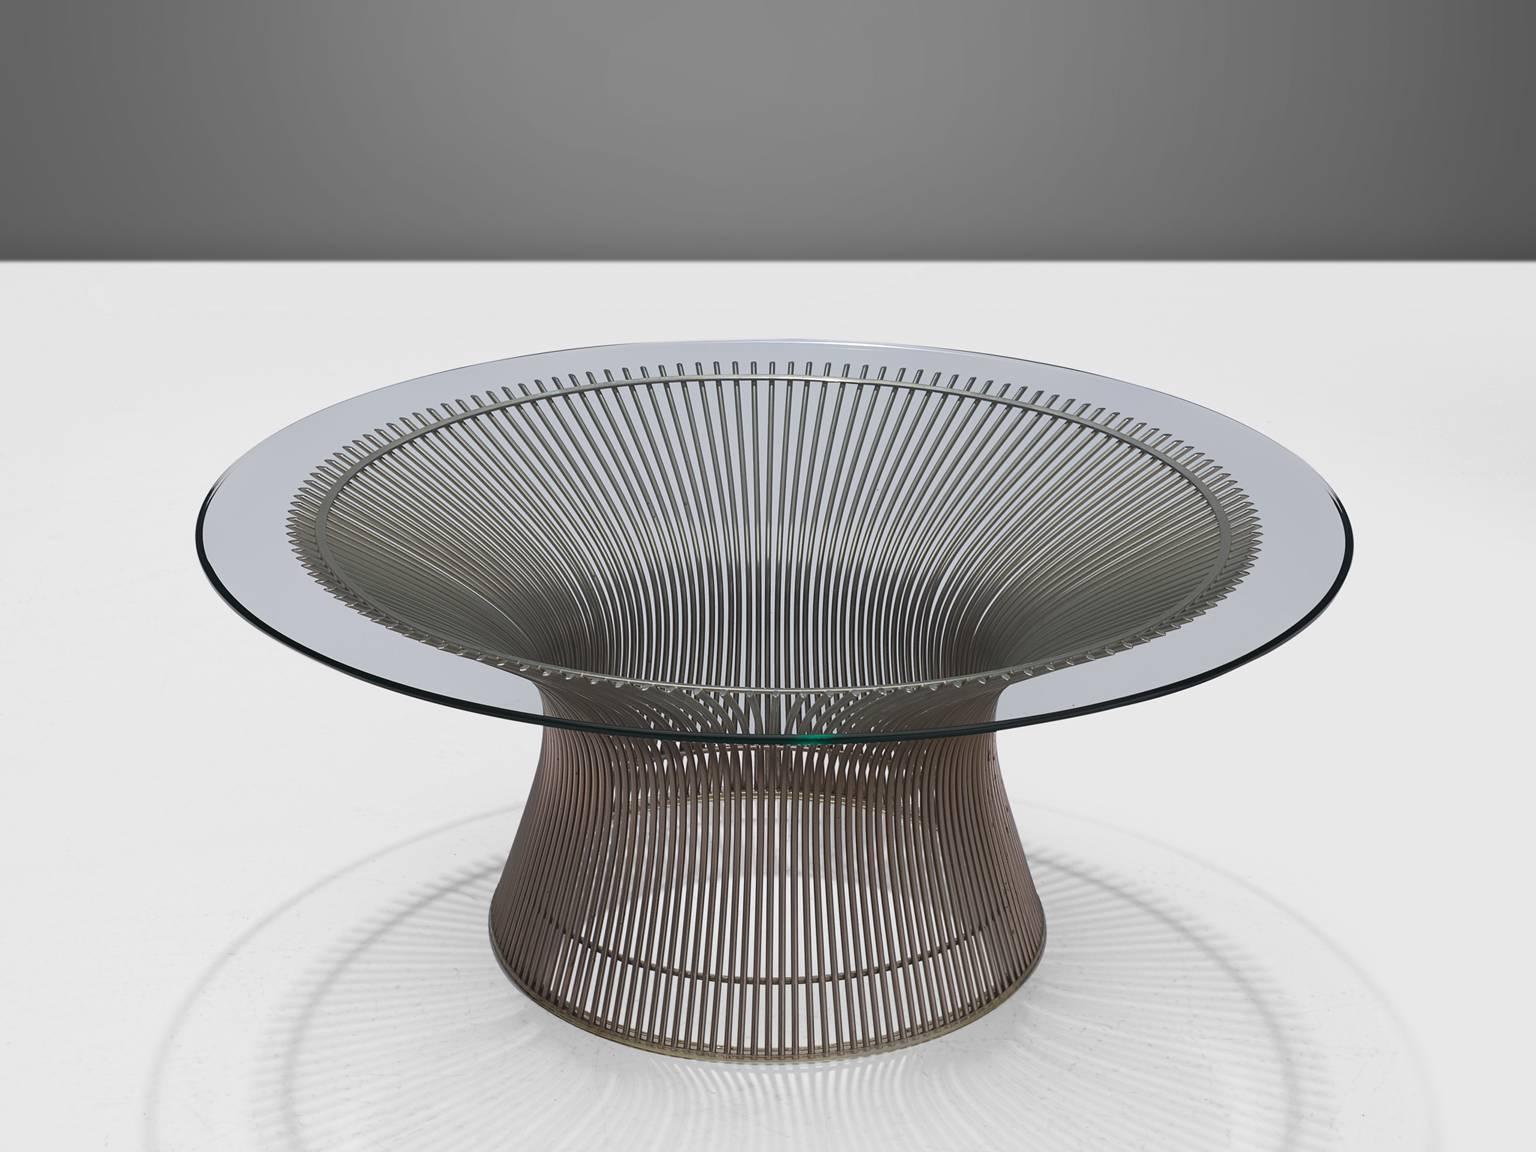 Warren Platner for Knoll, cocktail table, glass and metal, United States, 1966, 1980s production. 

This iconic coffee table by Warren Platner is created by welding curved steel rods to circular and semi-circular frames, simultaneously serving as